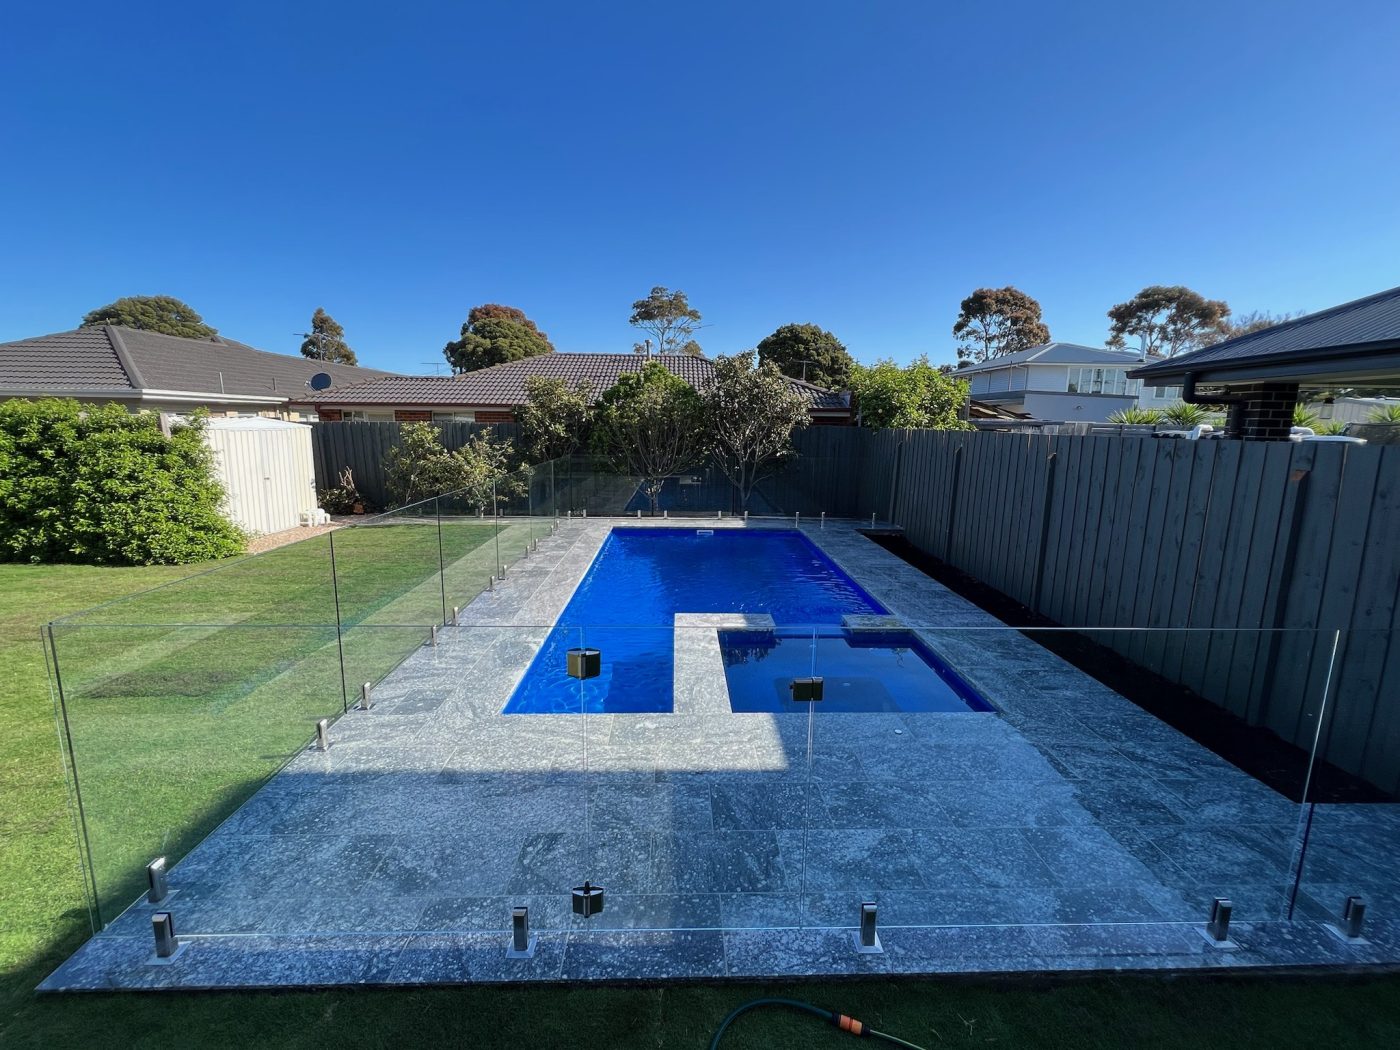 FANTASY-GREY-SANDBLASTED-GRANITE_RMS-TRADERS_NATURAL-STONE-PAVERS-POOL-COPING-SUPPLIER-MELBOURNE-24-scaled